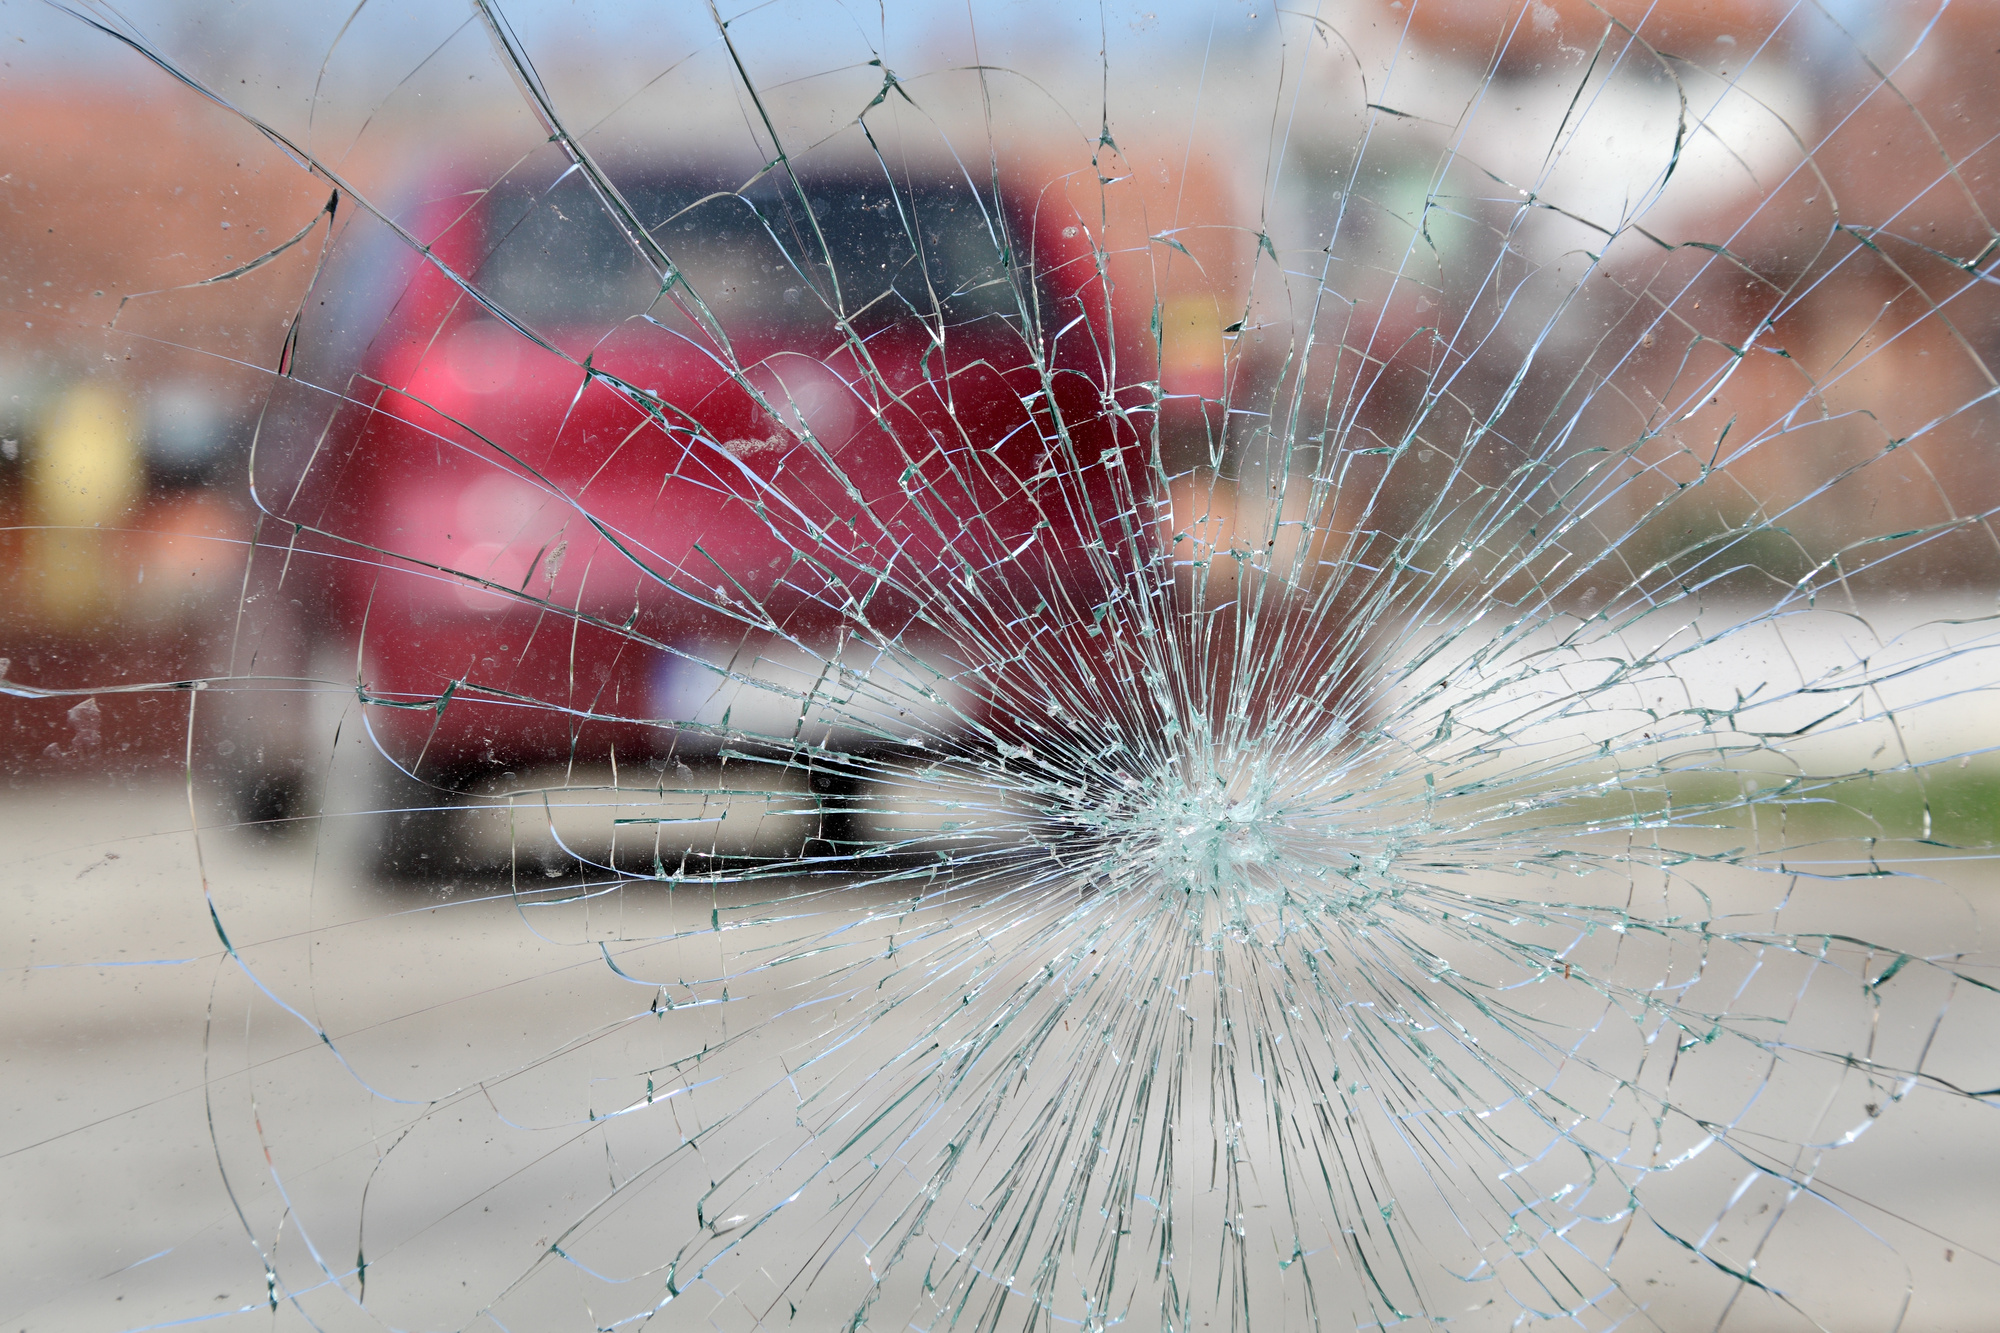 driving with a cracked windshield